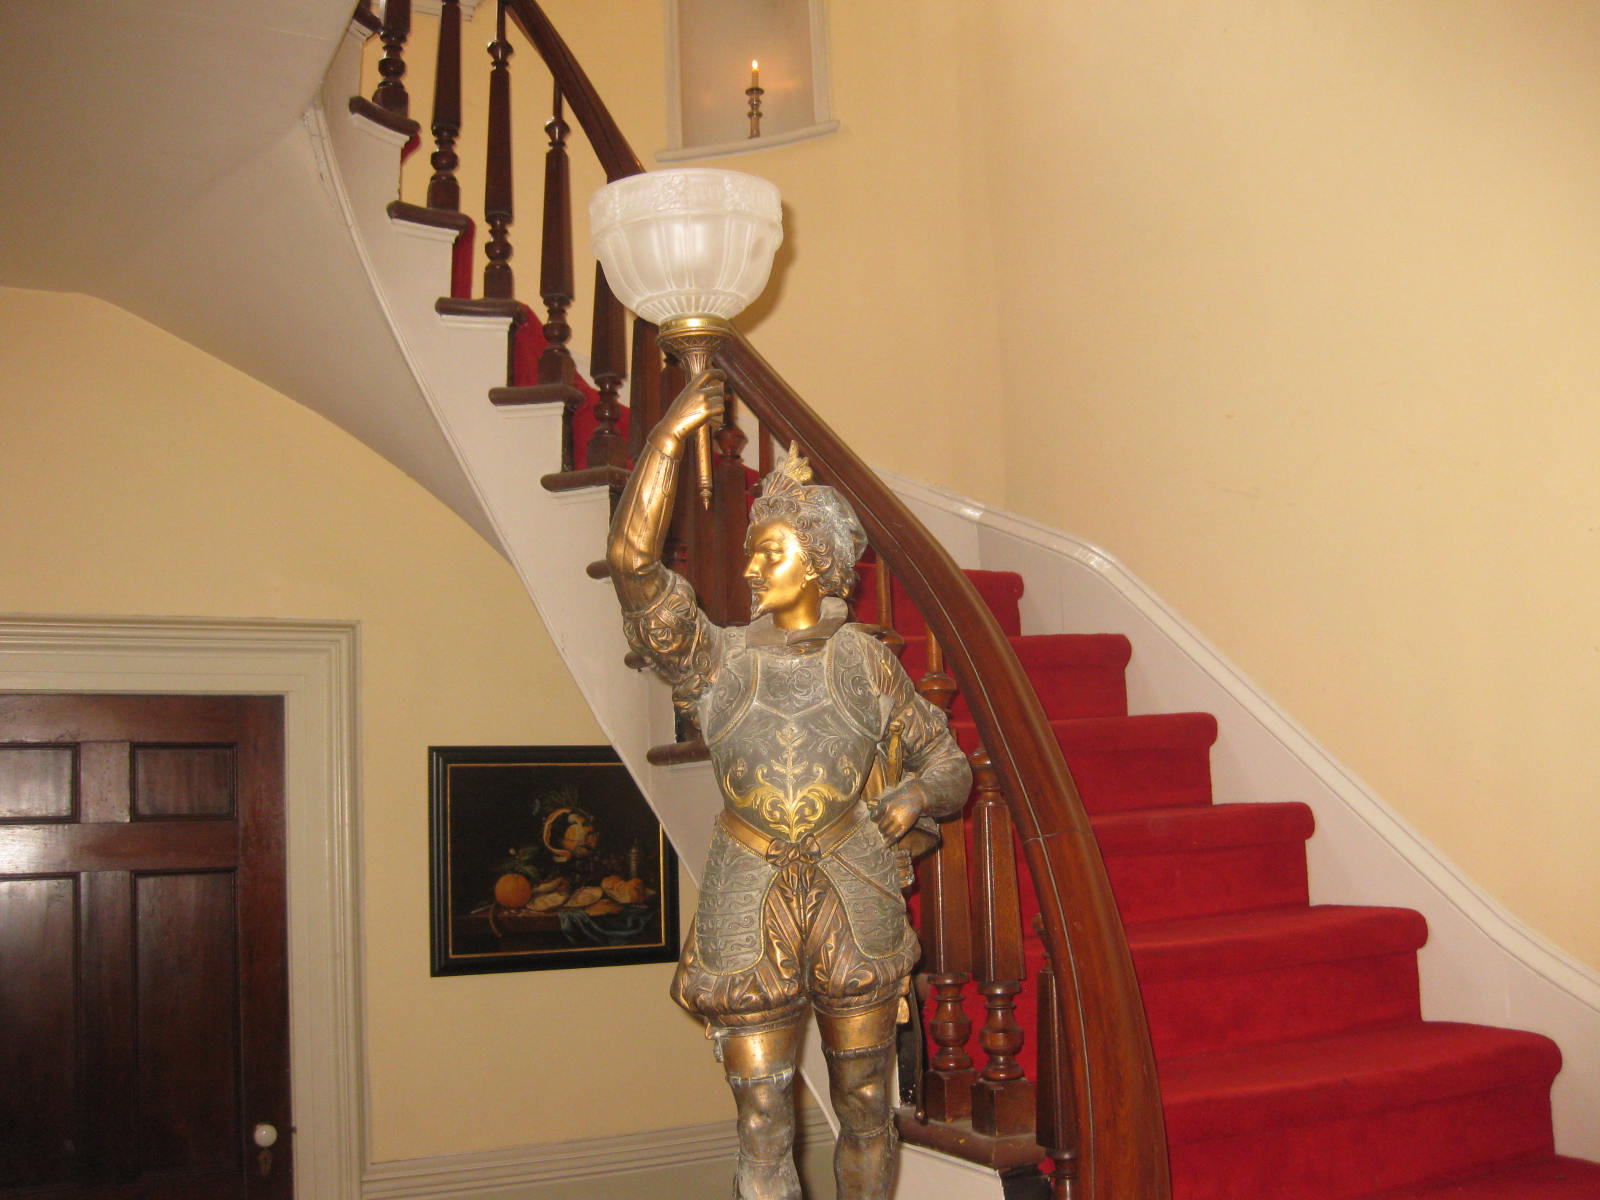 House Tour, Part 2: The Entrance Hall & Staircase